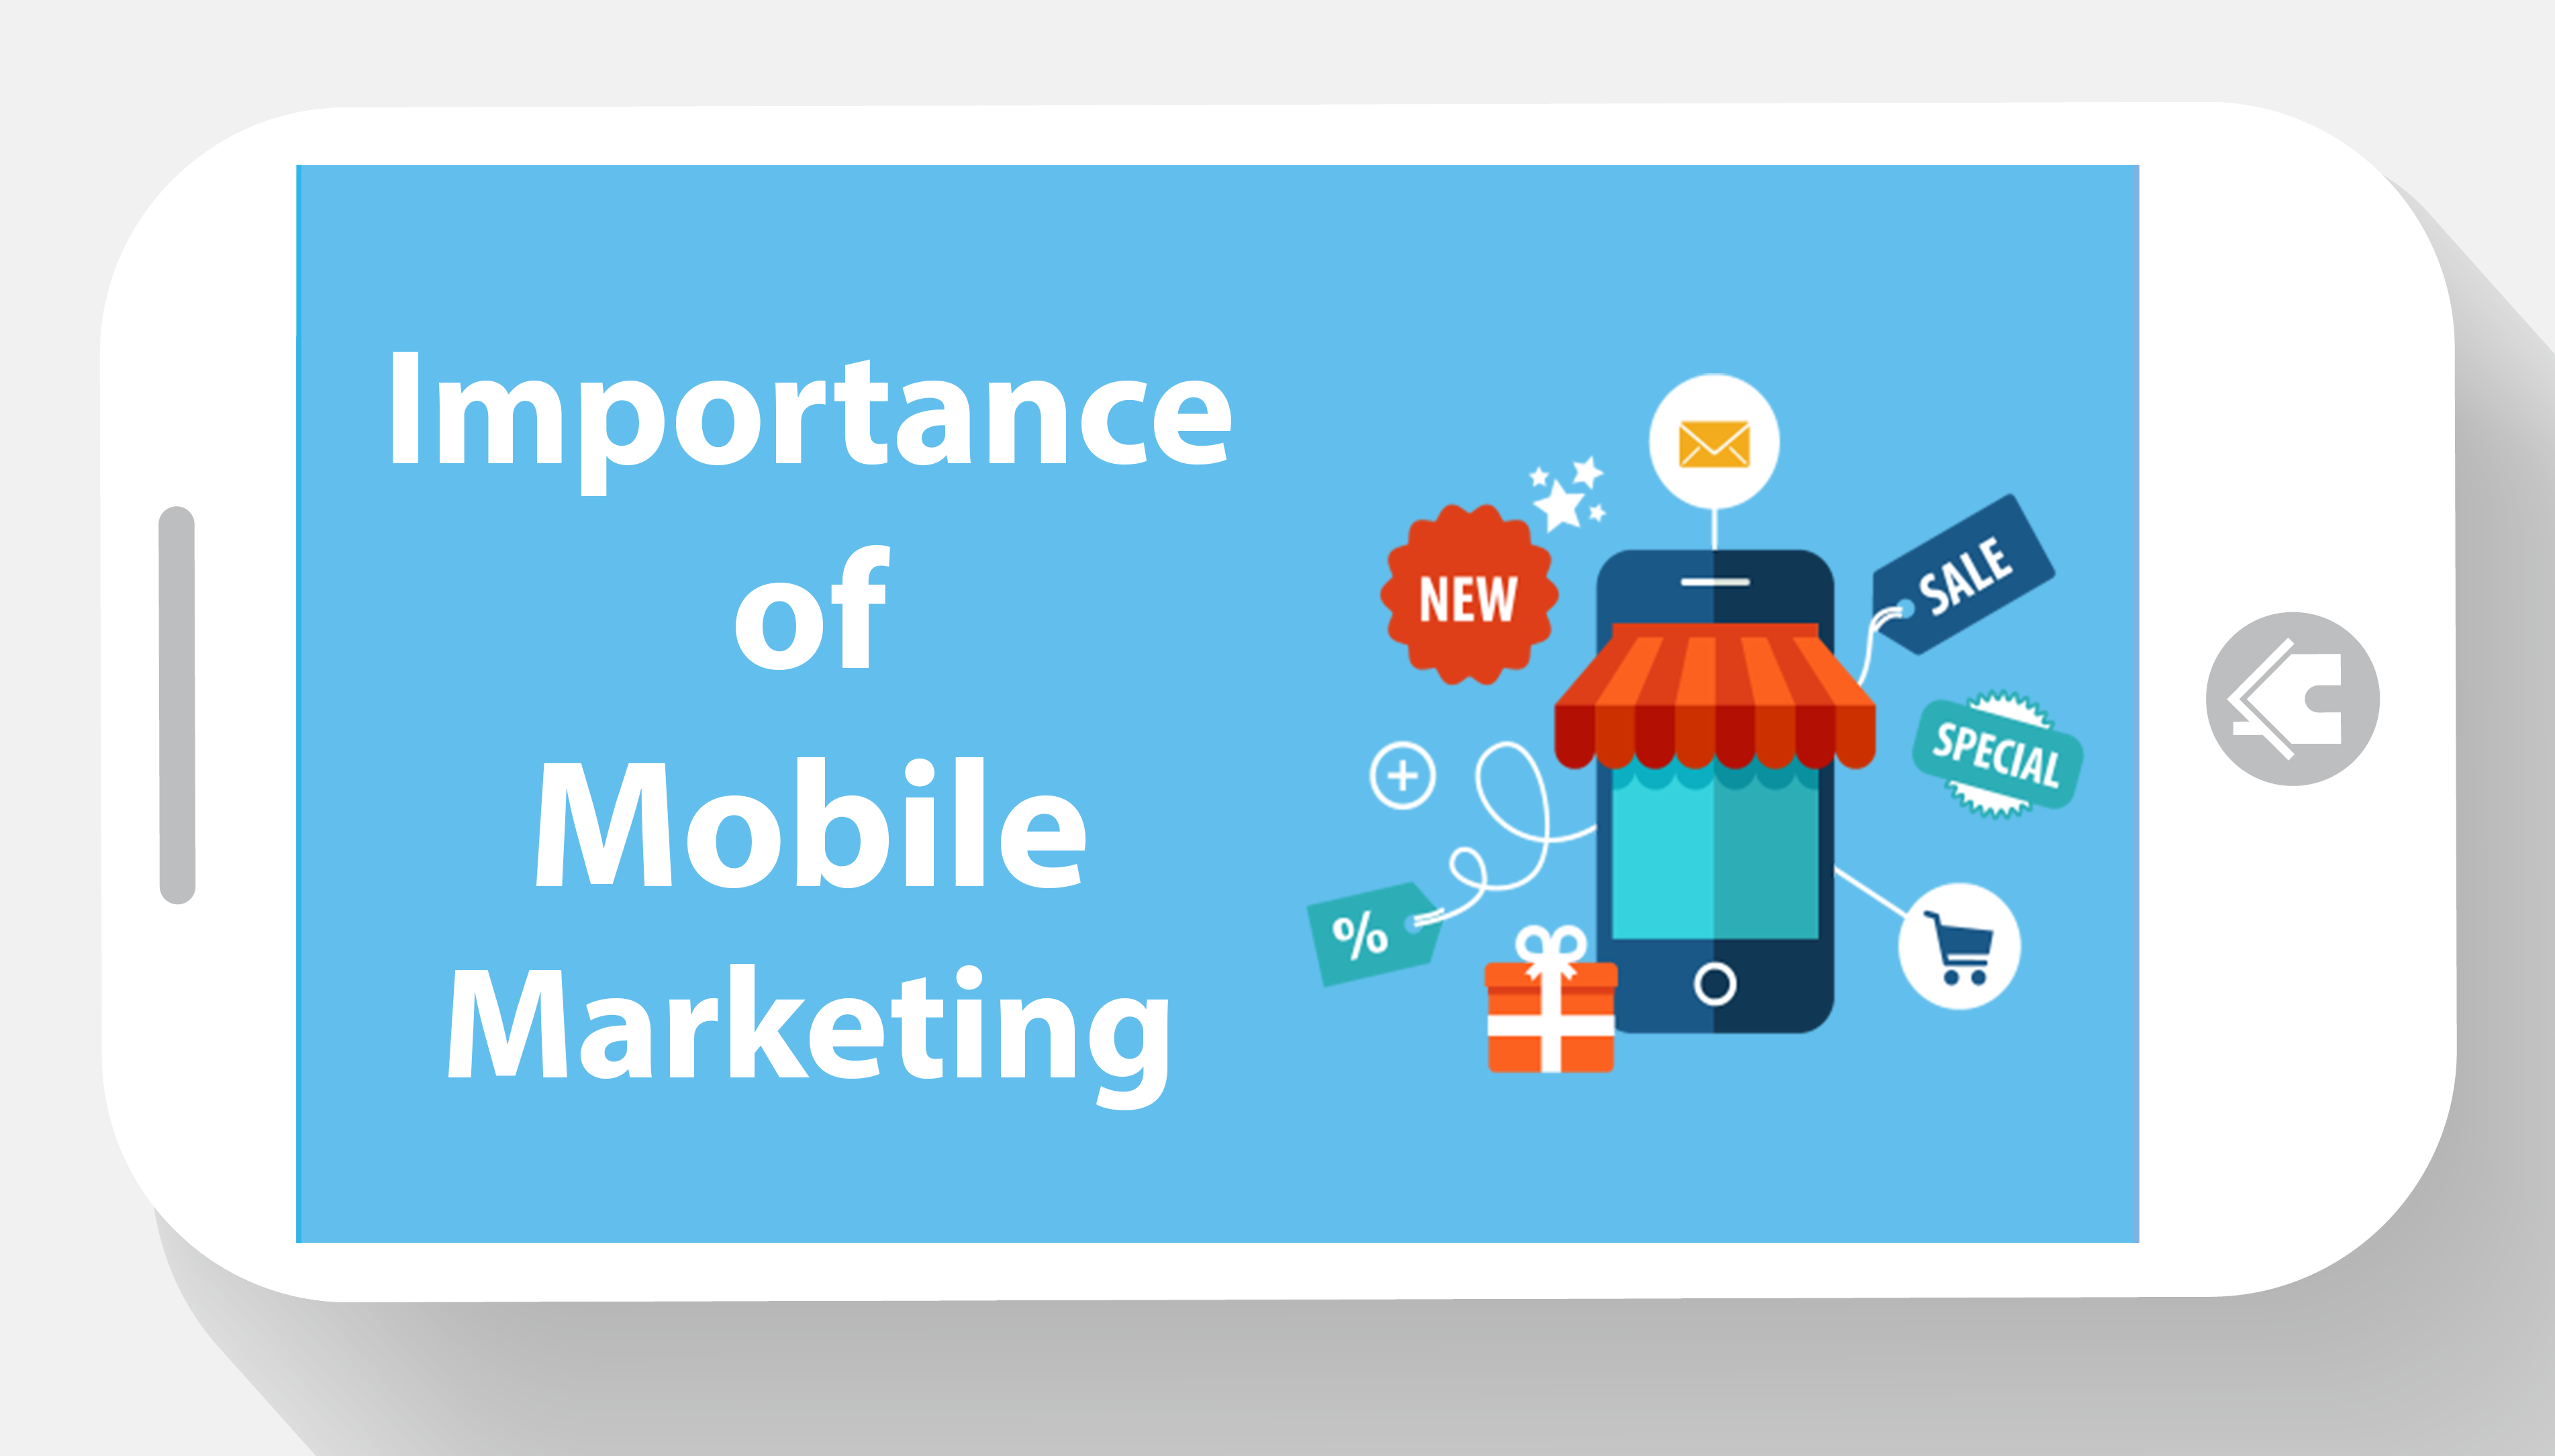 Importance of Mobile Marketing & Advertising